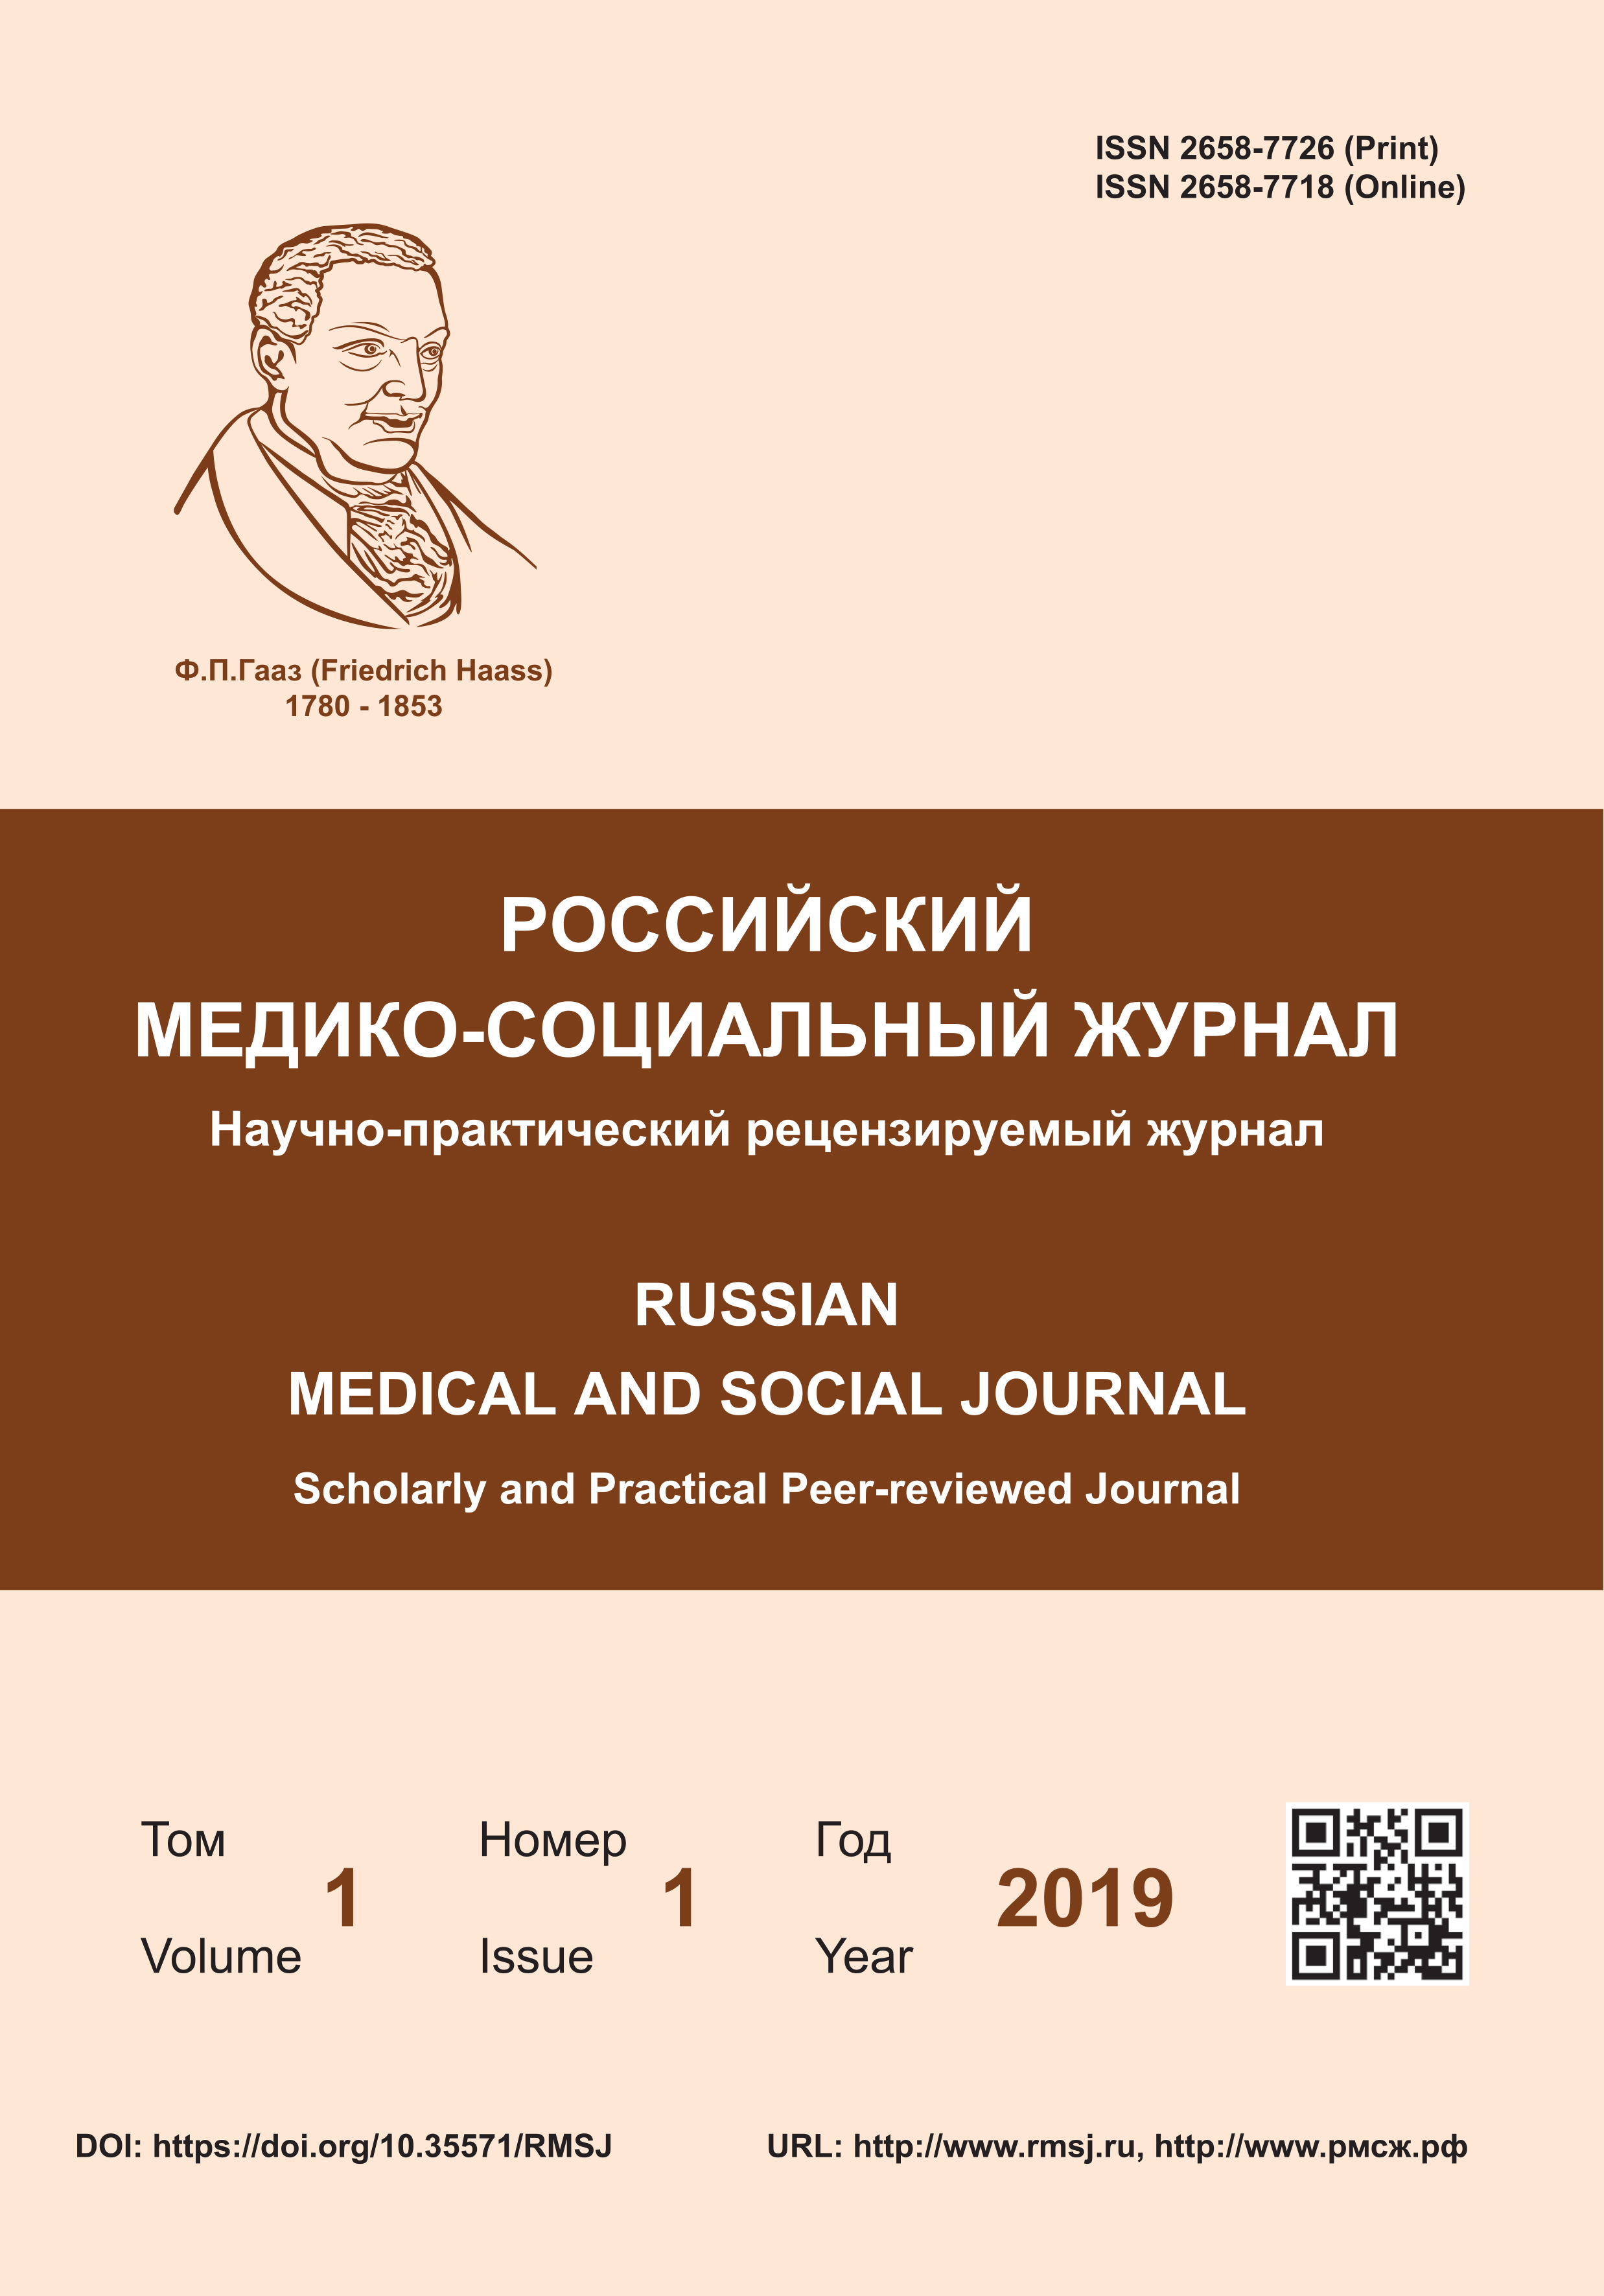                         Russian Medical and Social Journal
            